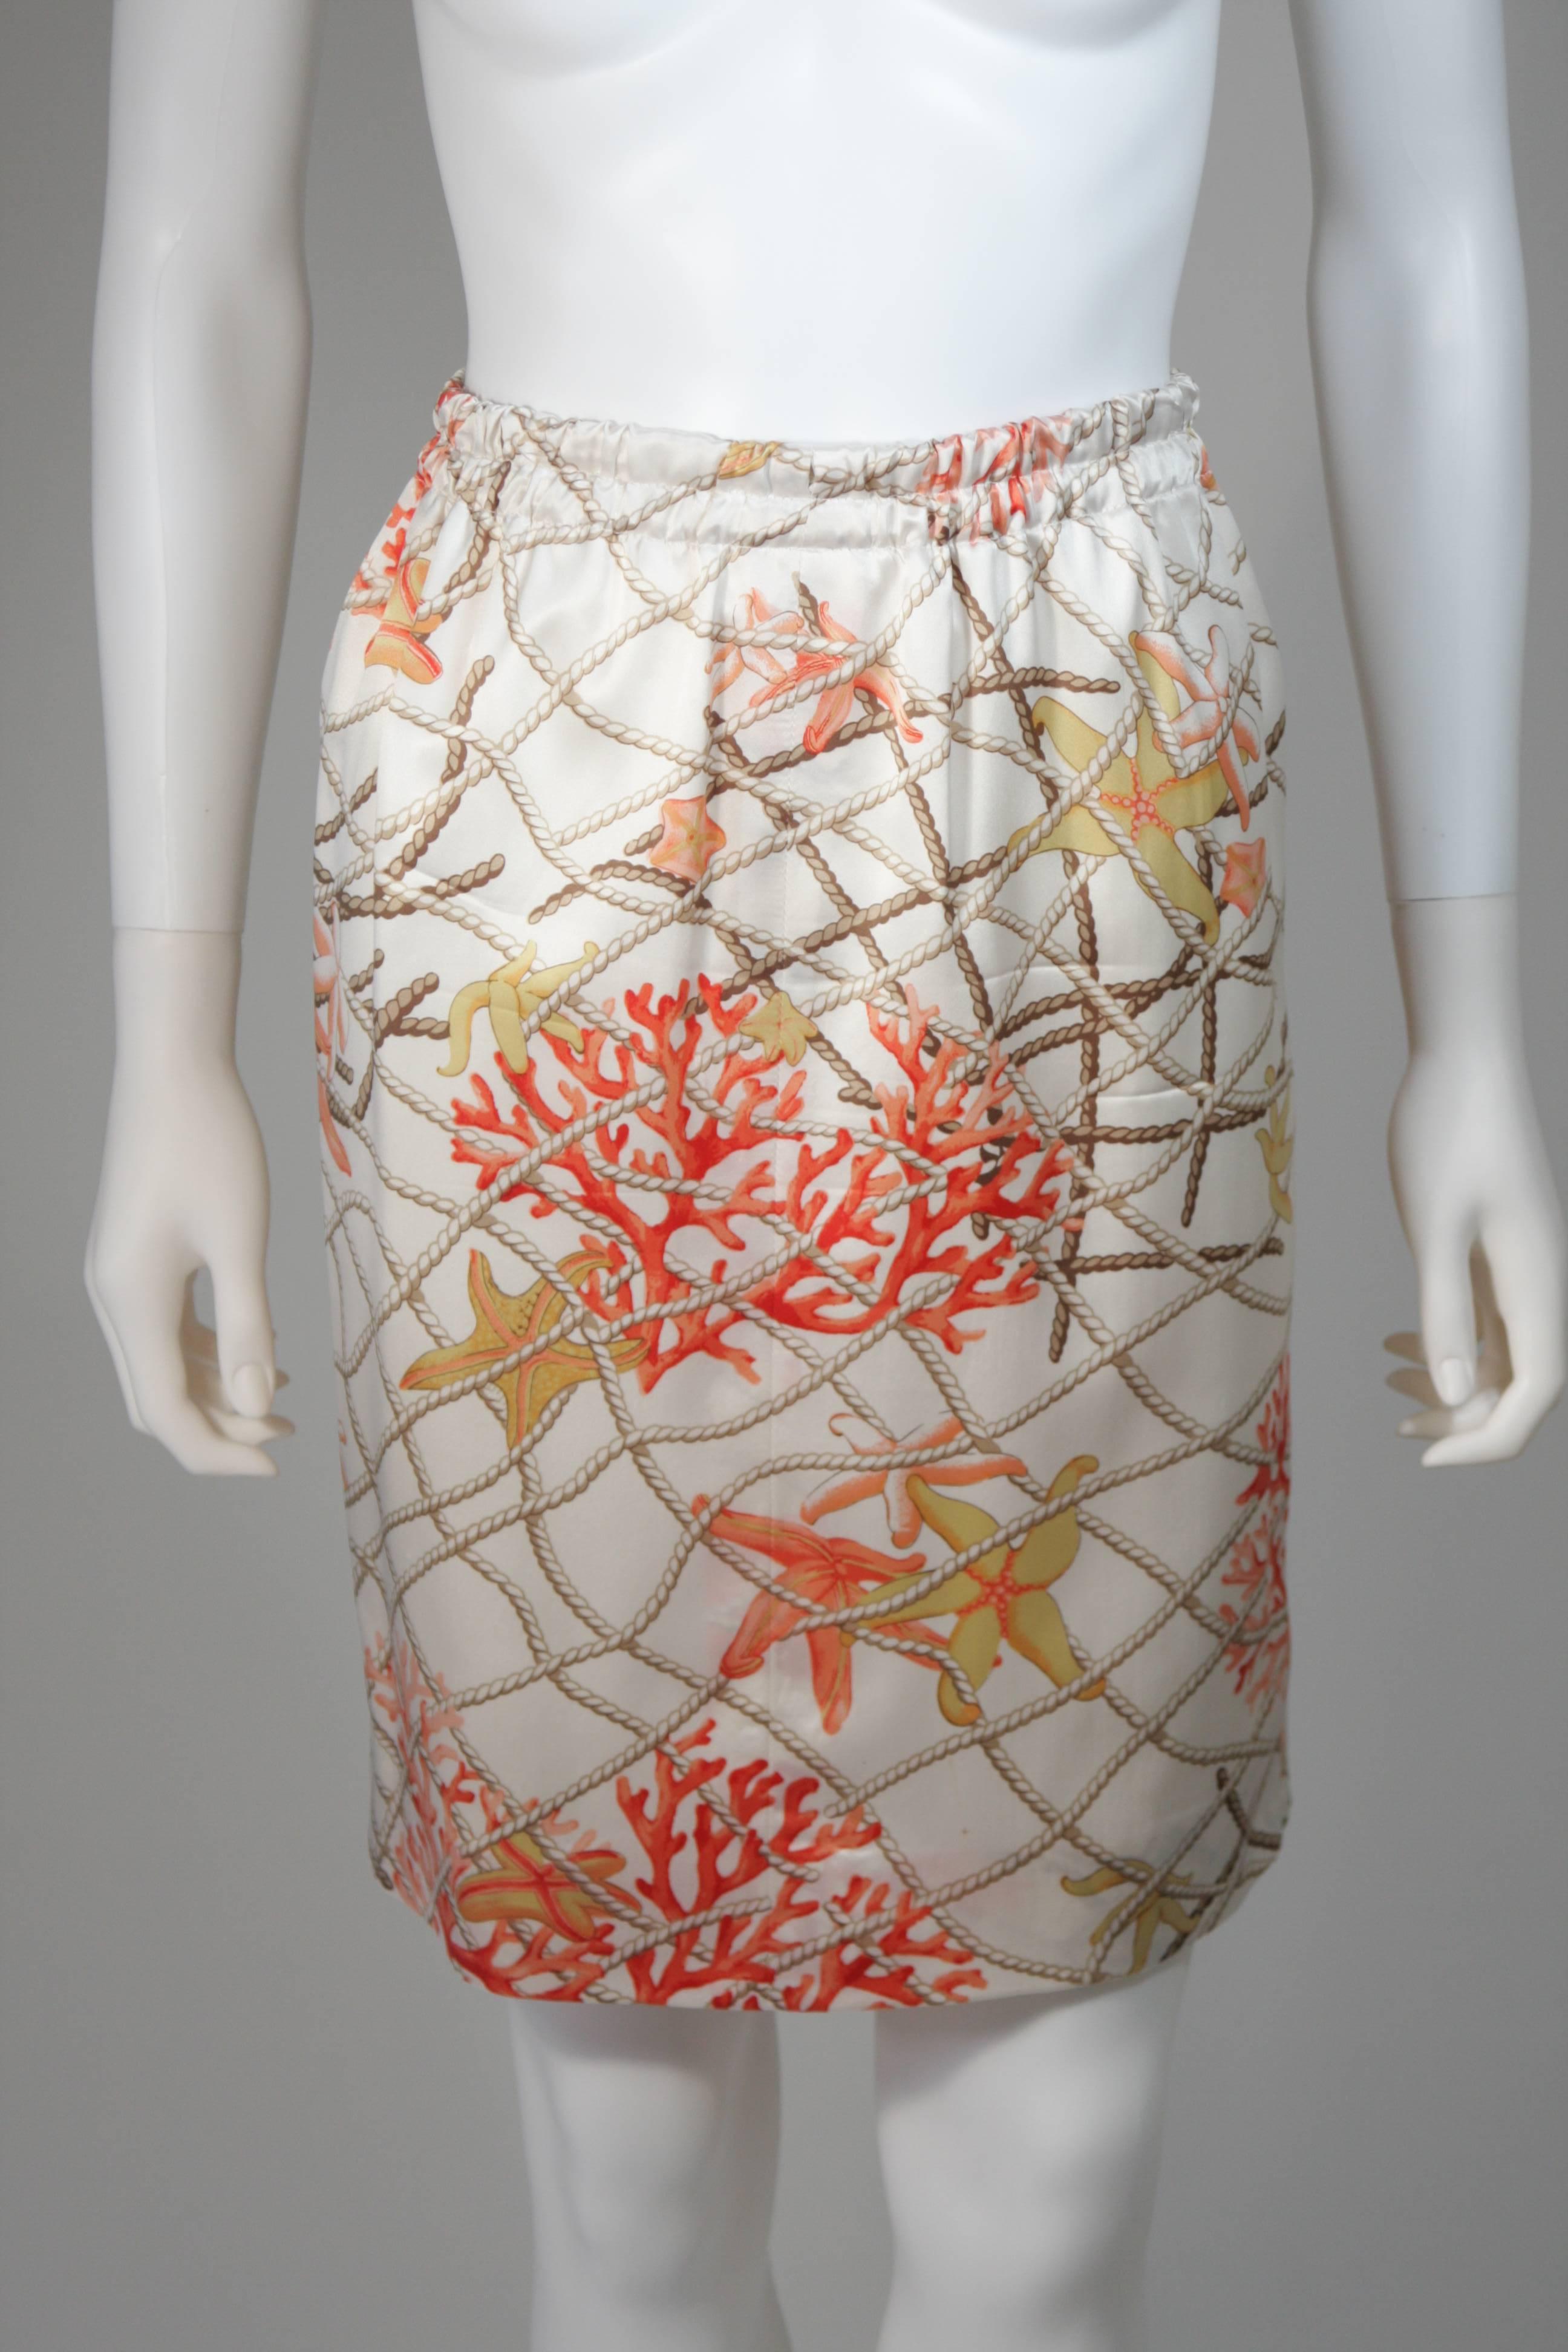 Valentino Coral Ocean Life Motif Skirt Suit with Rope Pattern Size Medium Large 5